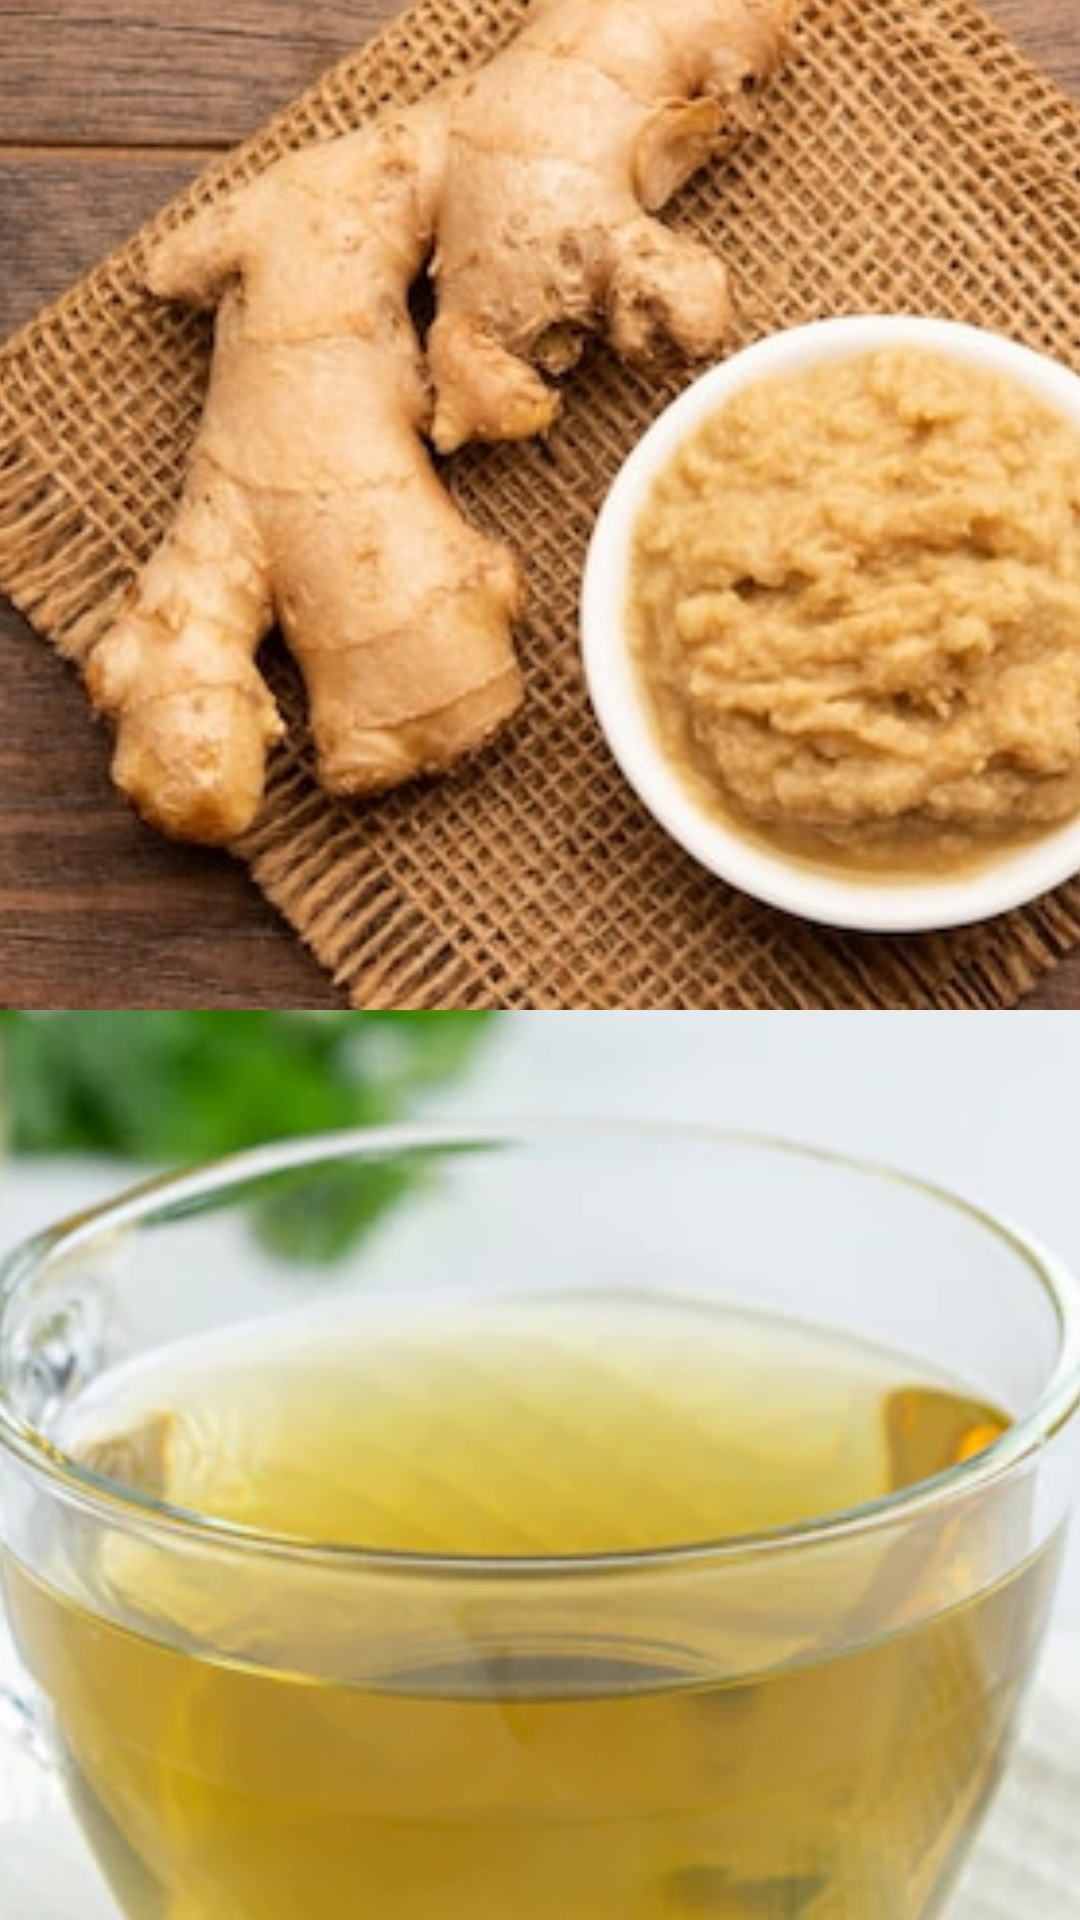 From ginger to green tea, eat these 5 foods to detox your body